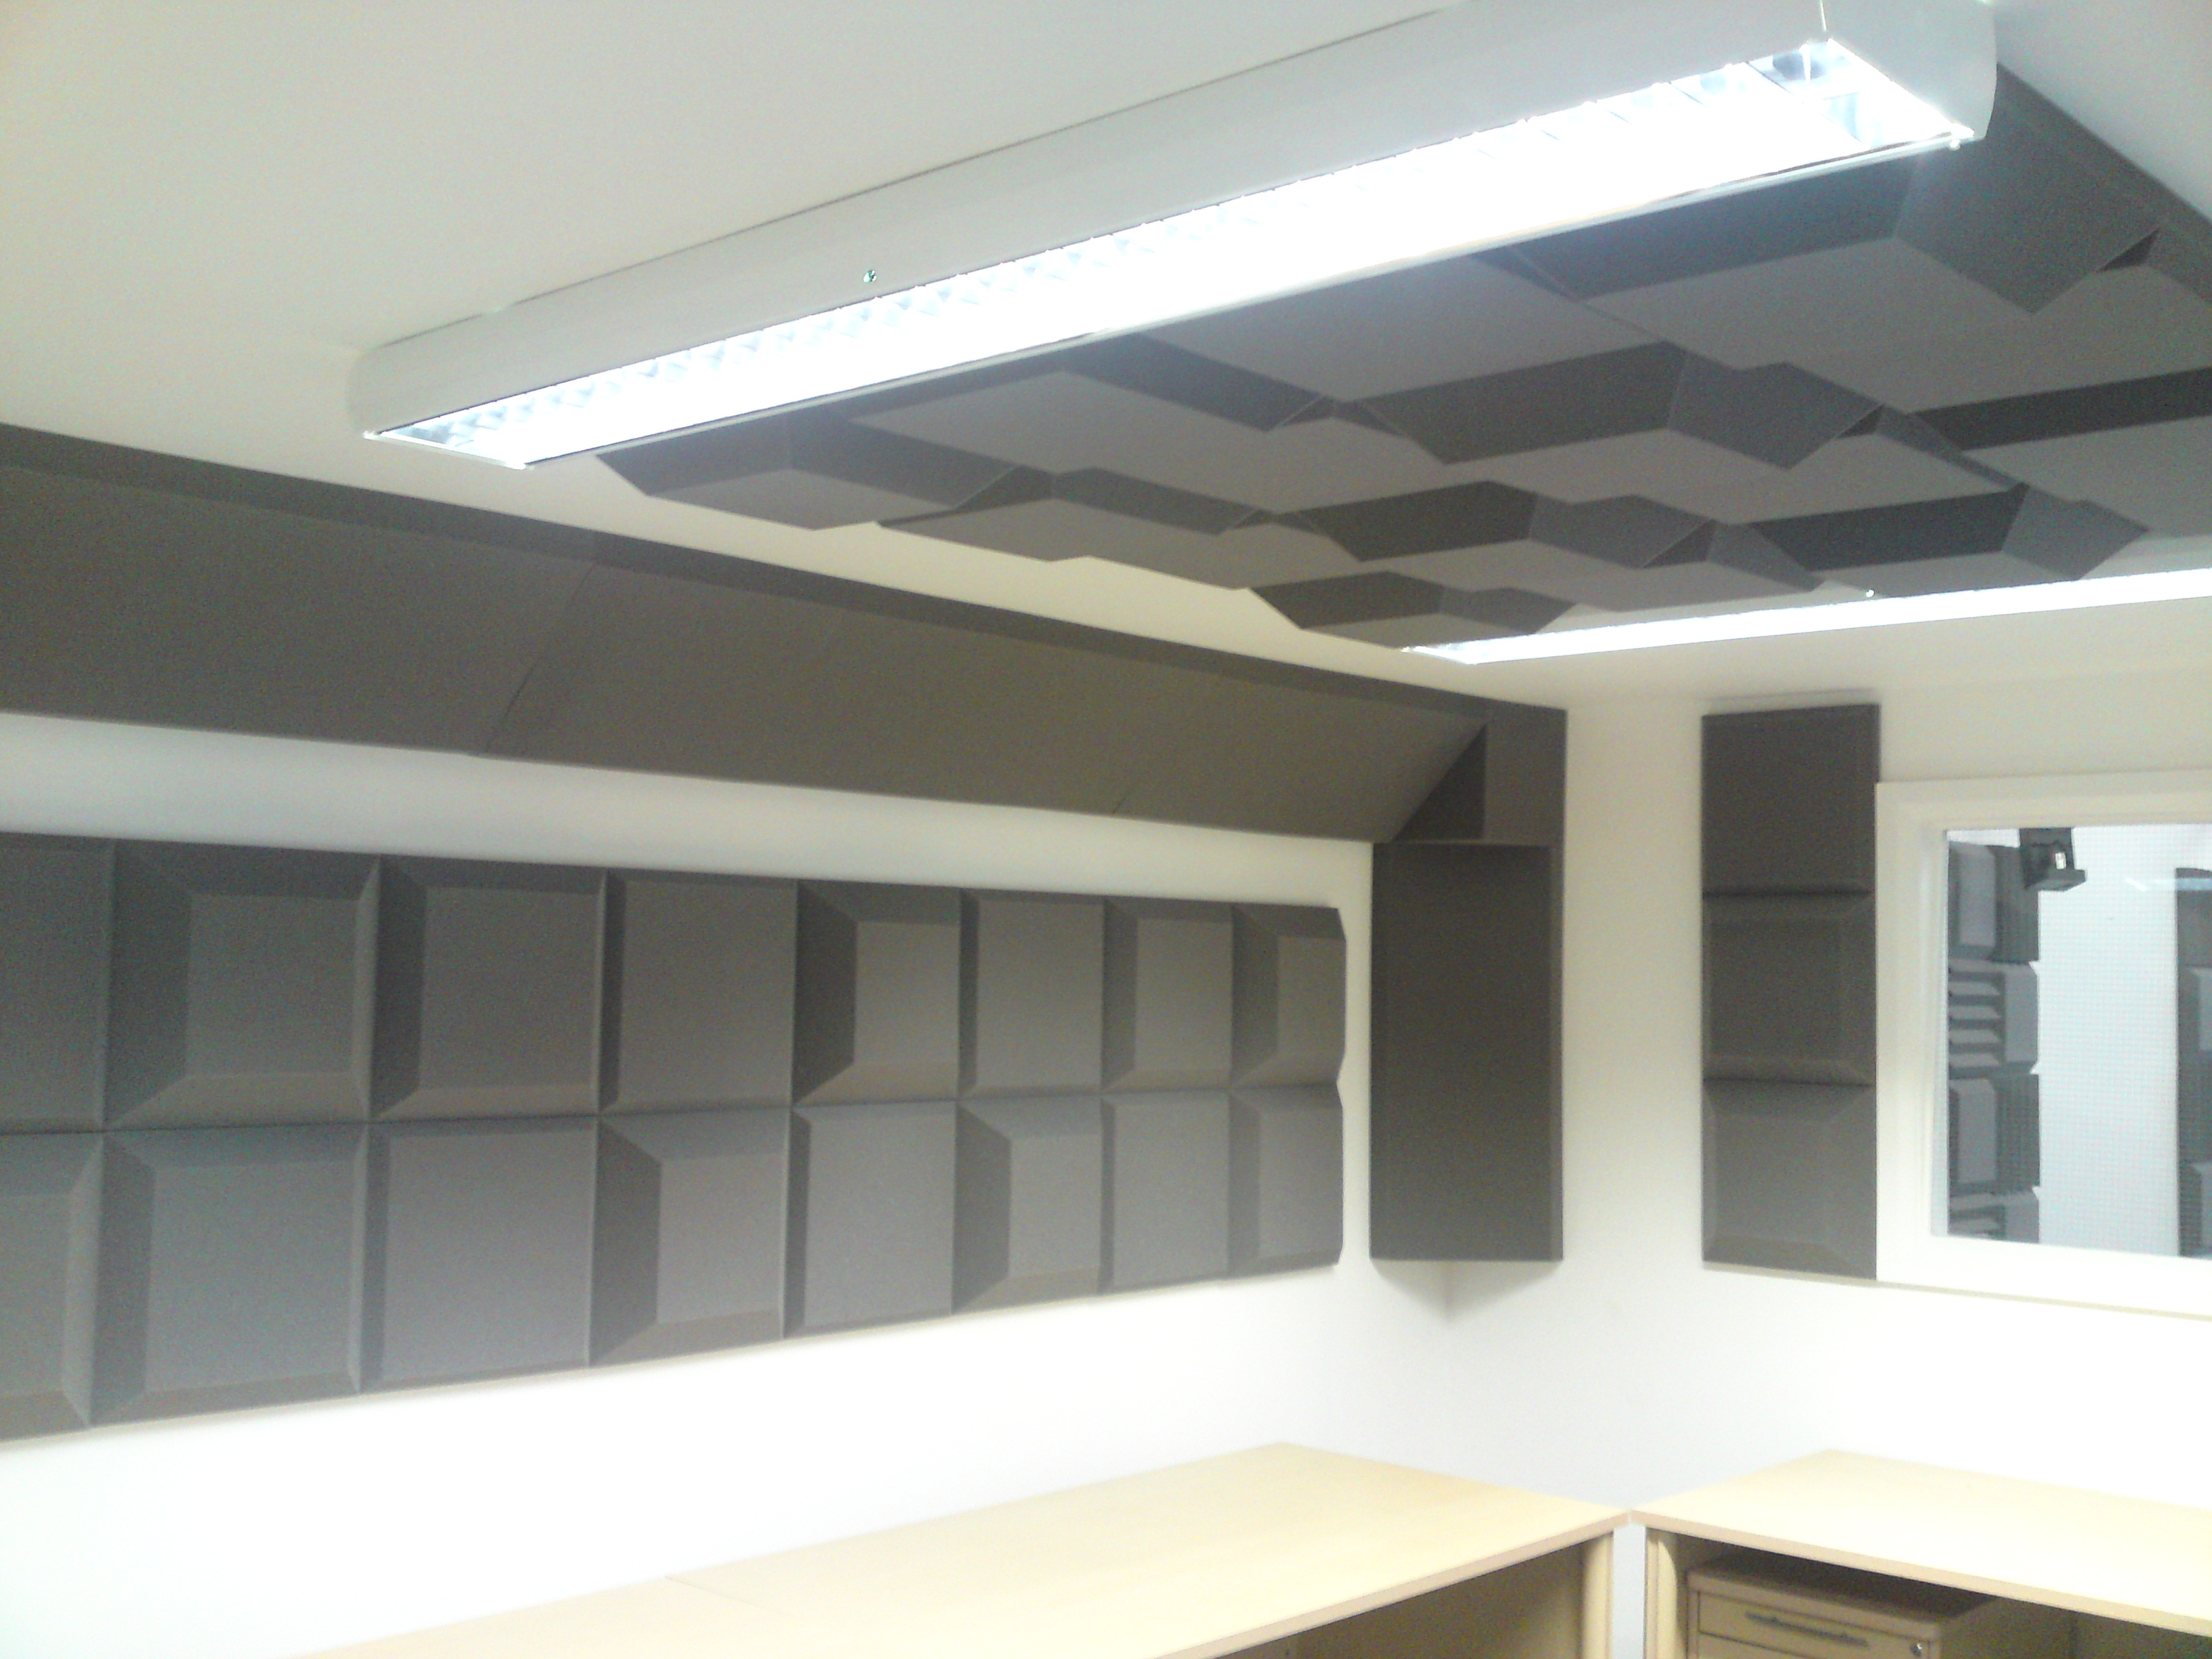 Mixed and matched Tegular sound absorbing tiles installed onto wall and ceiling of studio